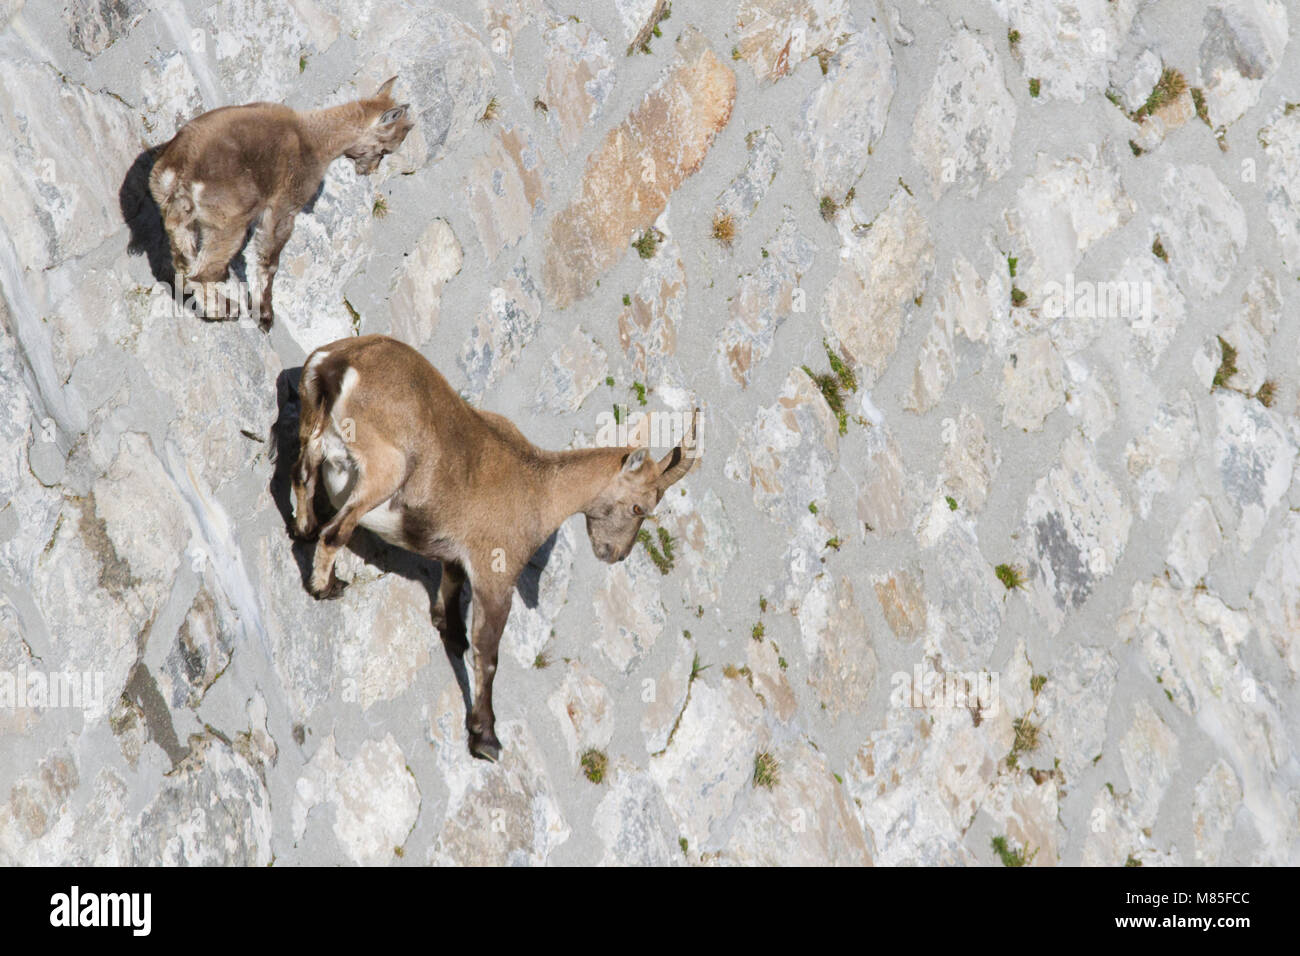 A female of alpine ibex (Capra ibex) with its pup is walking on a dam wall looking for mineralt salts. Antrona valley, Italy. Stock Photo